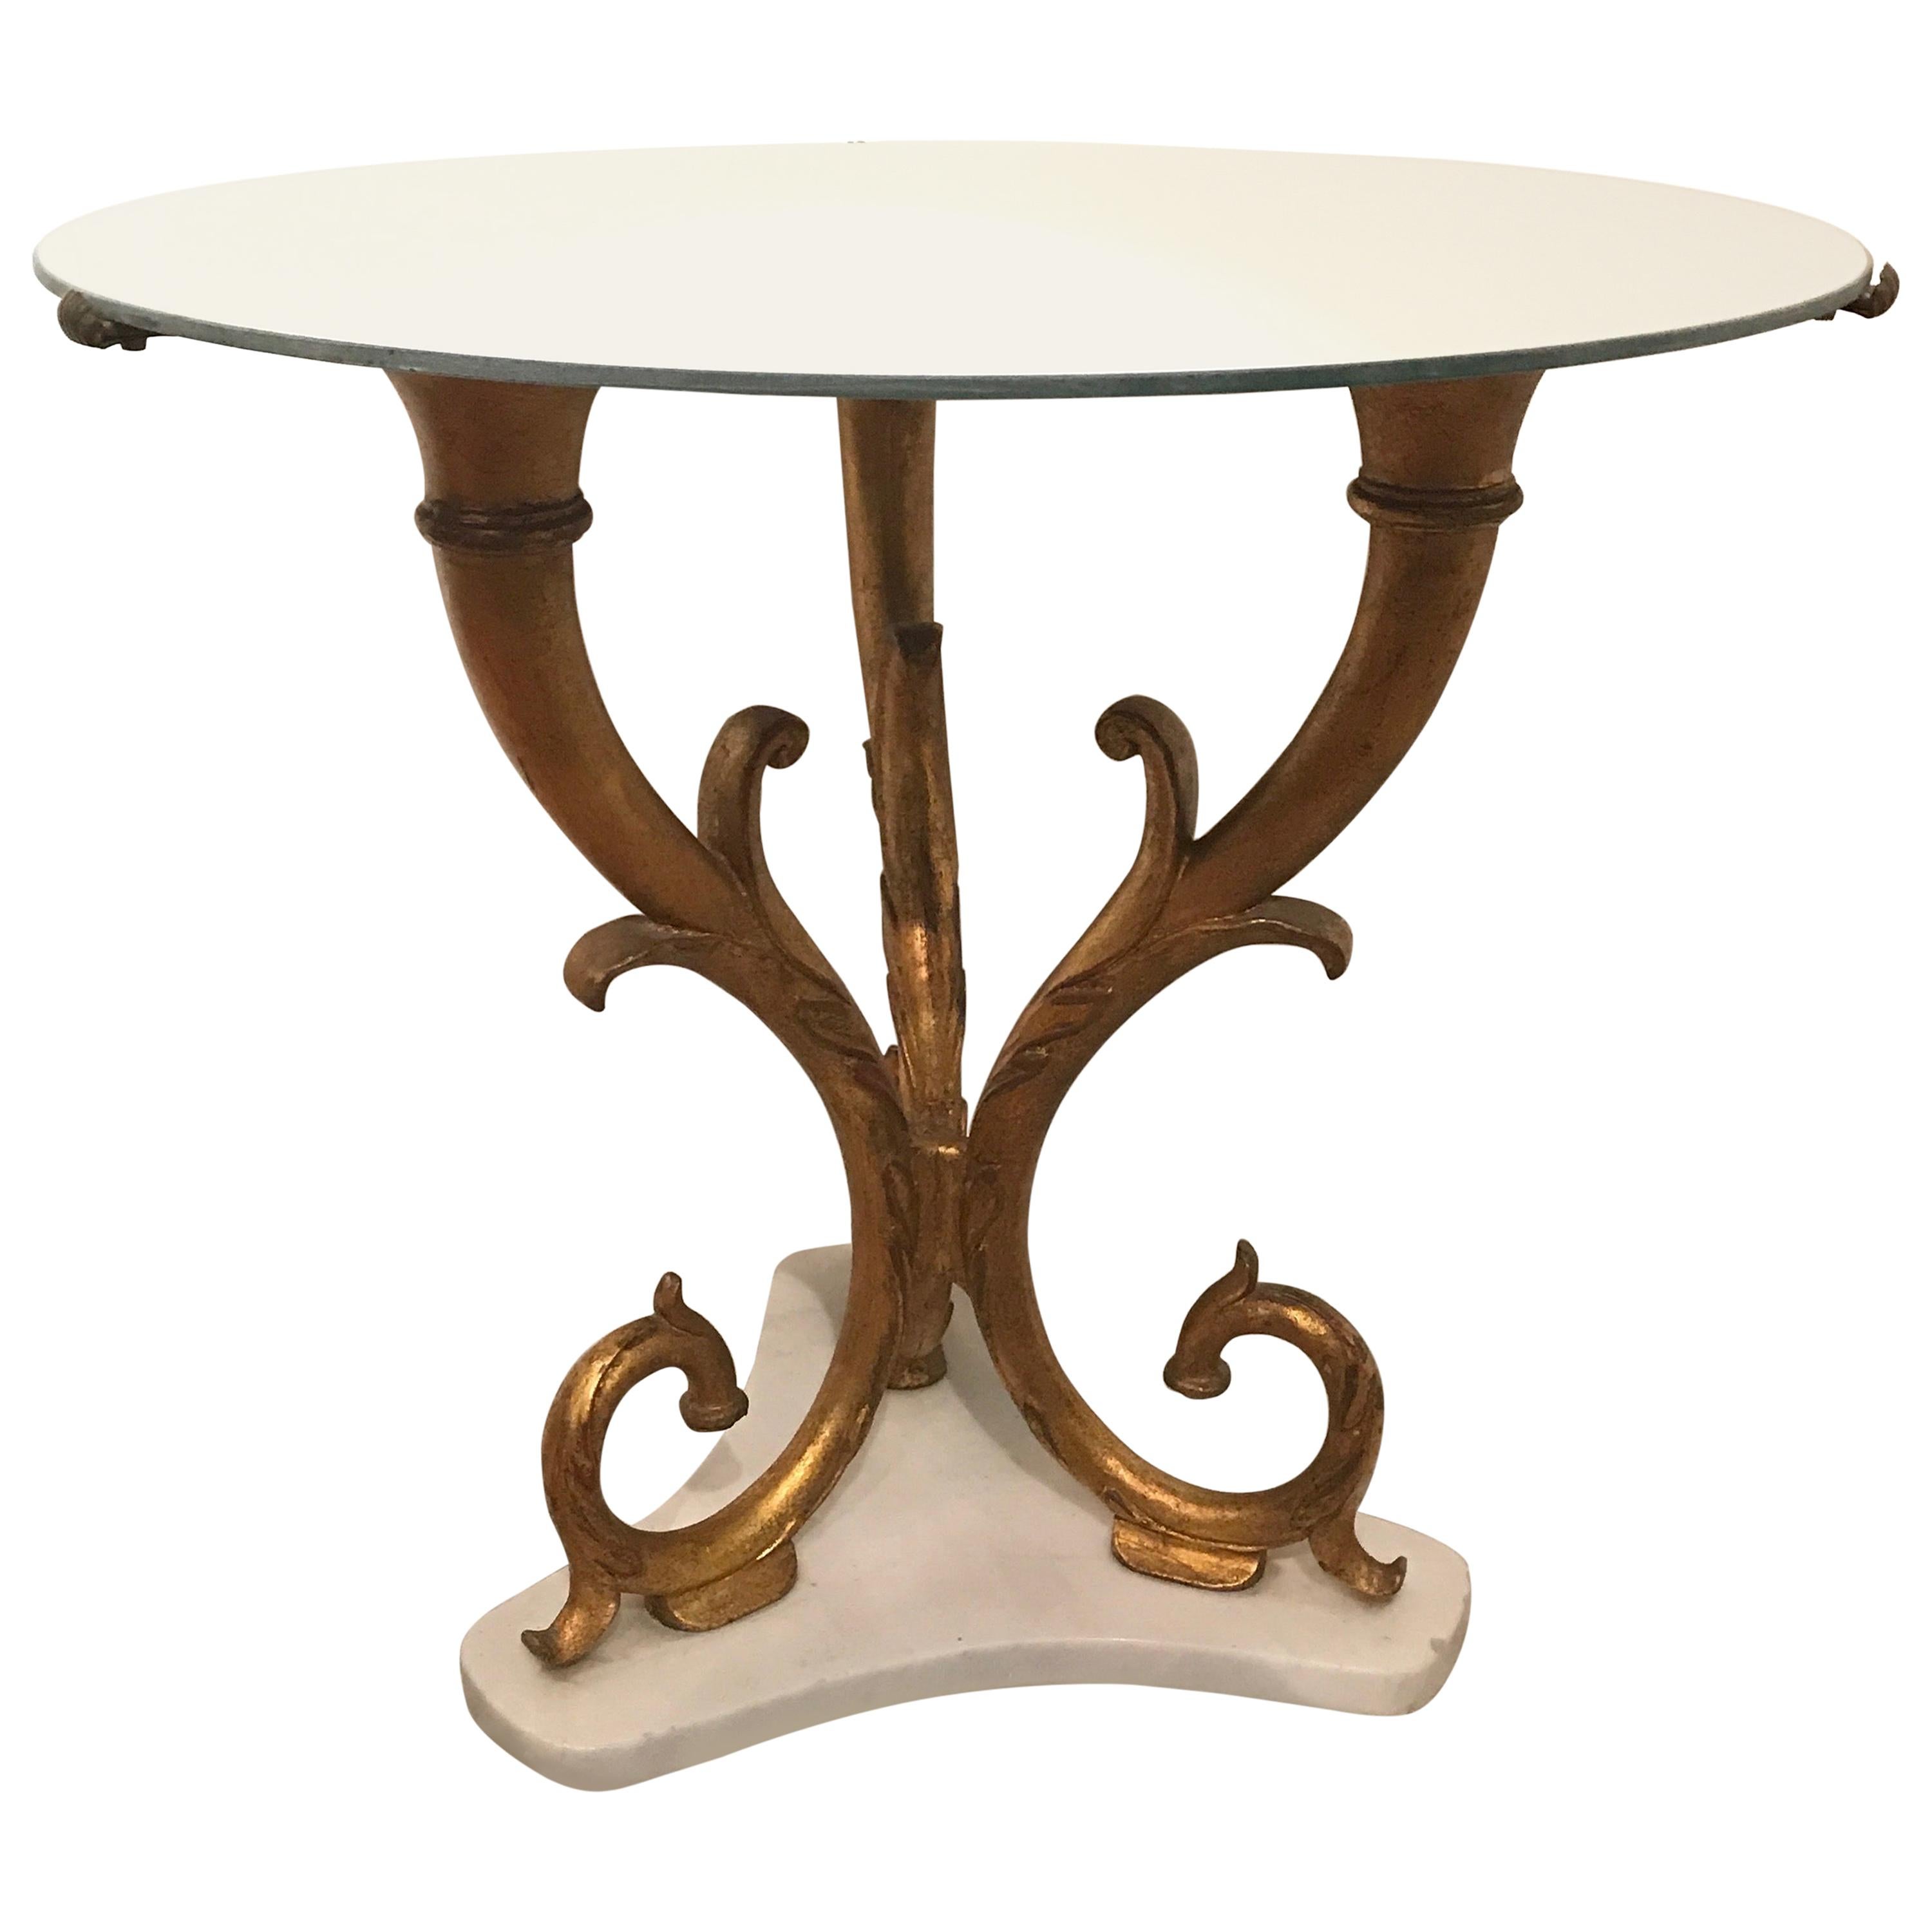 Palladio Gilded Iron Side Table with Mirrored Top